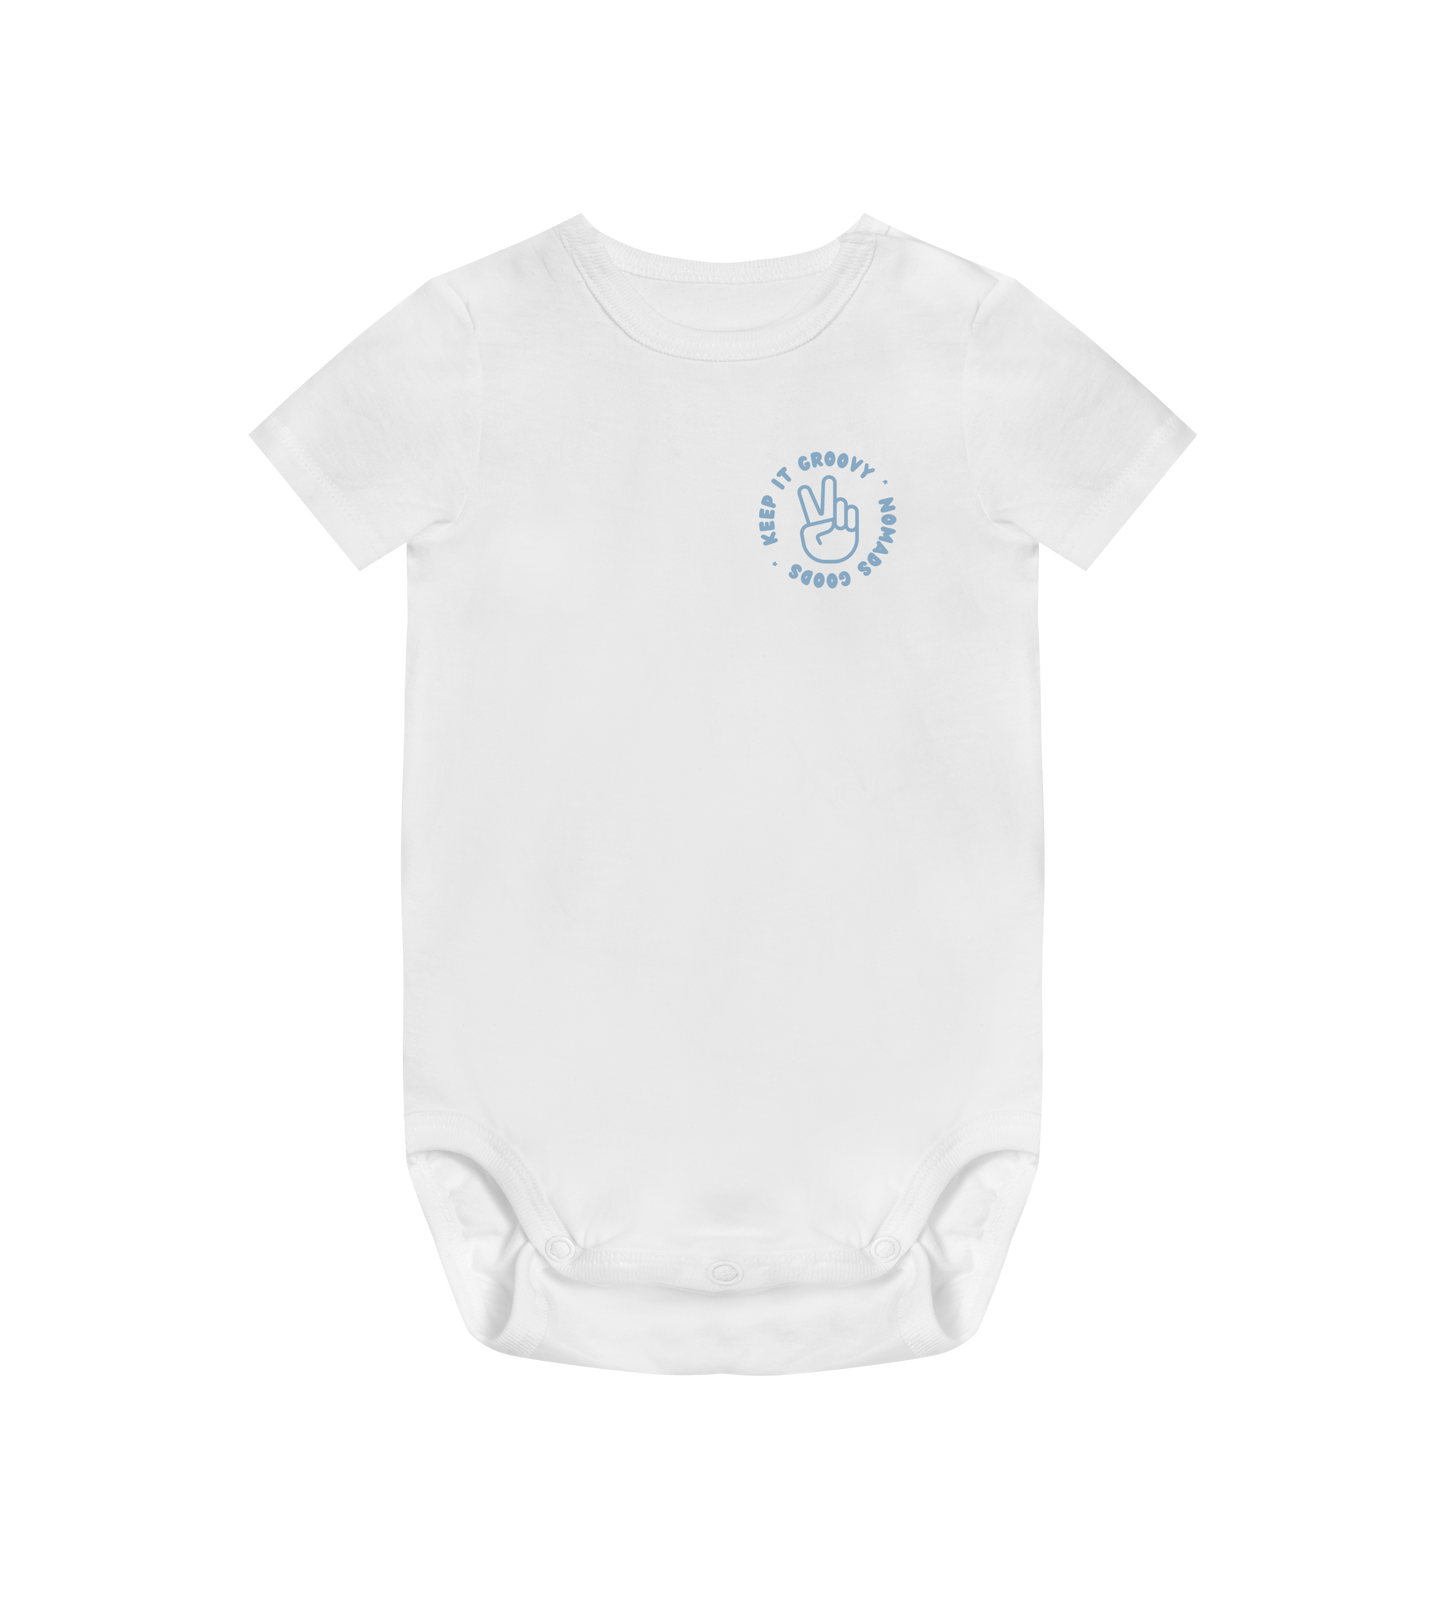 'Keep It Groovy' Baby Bodysuit - White with Blue Print